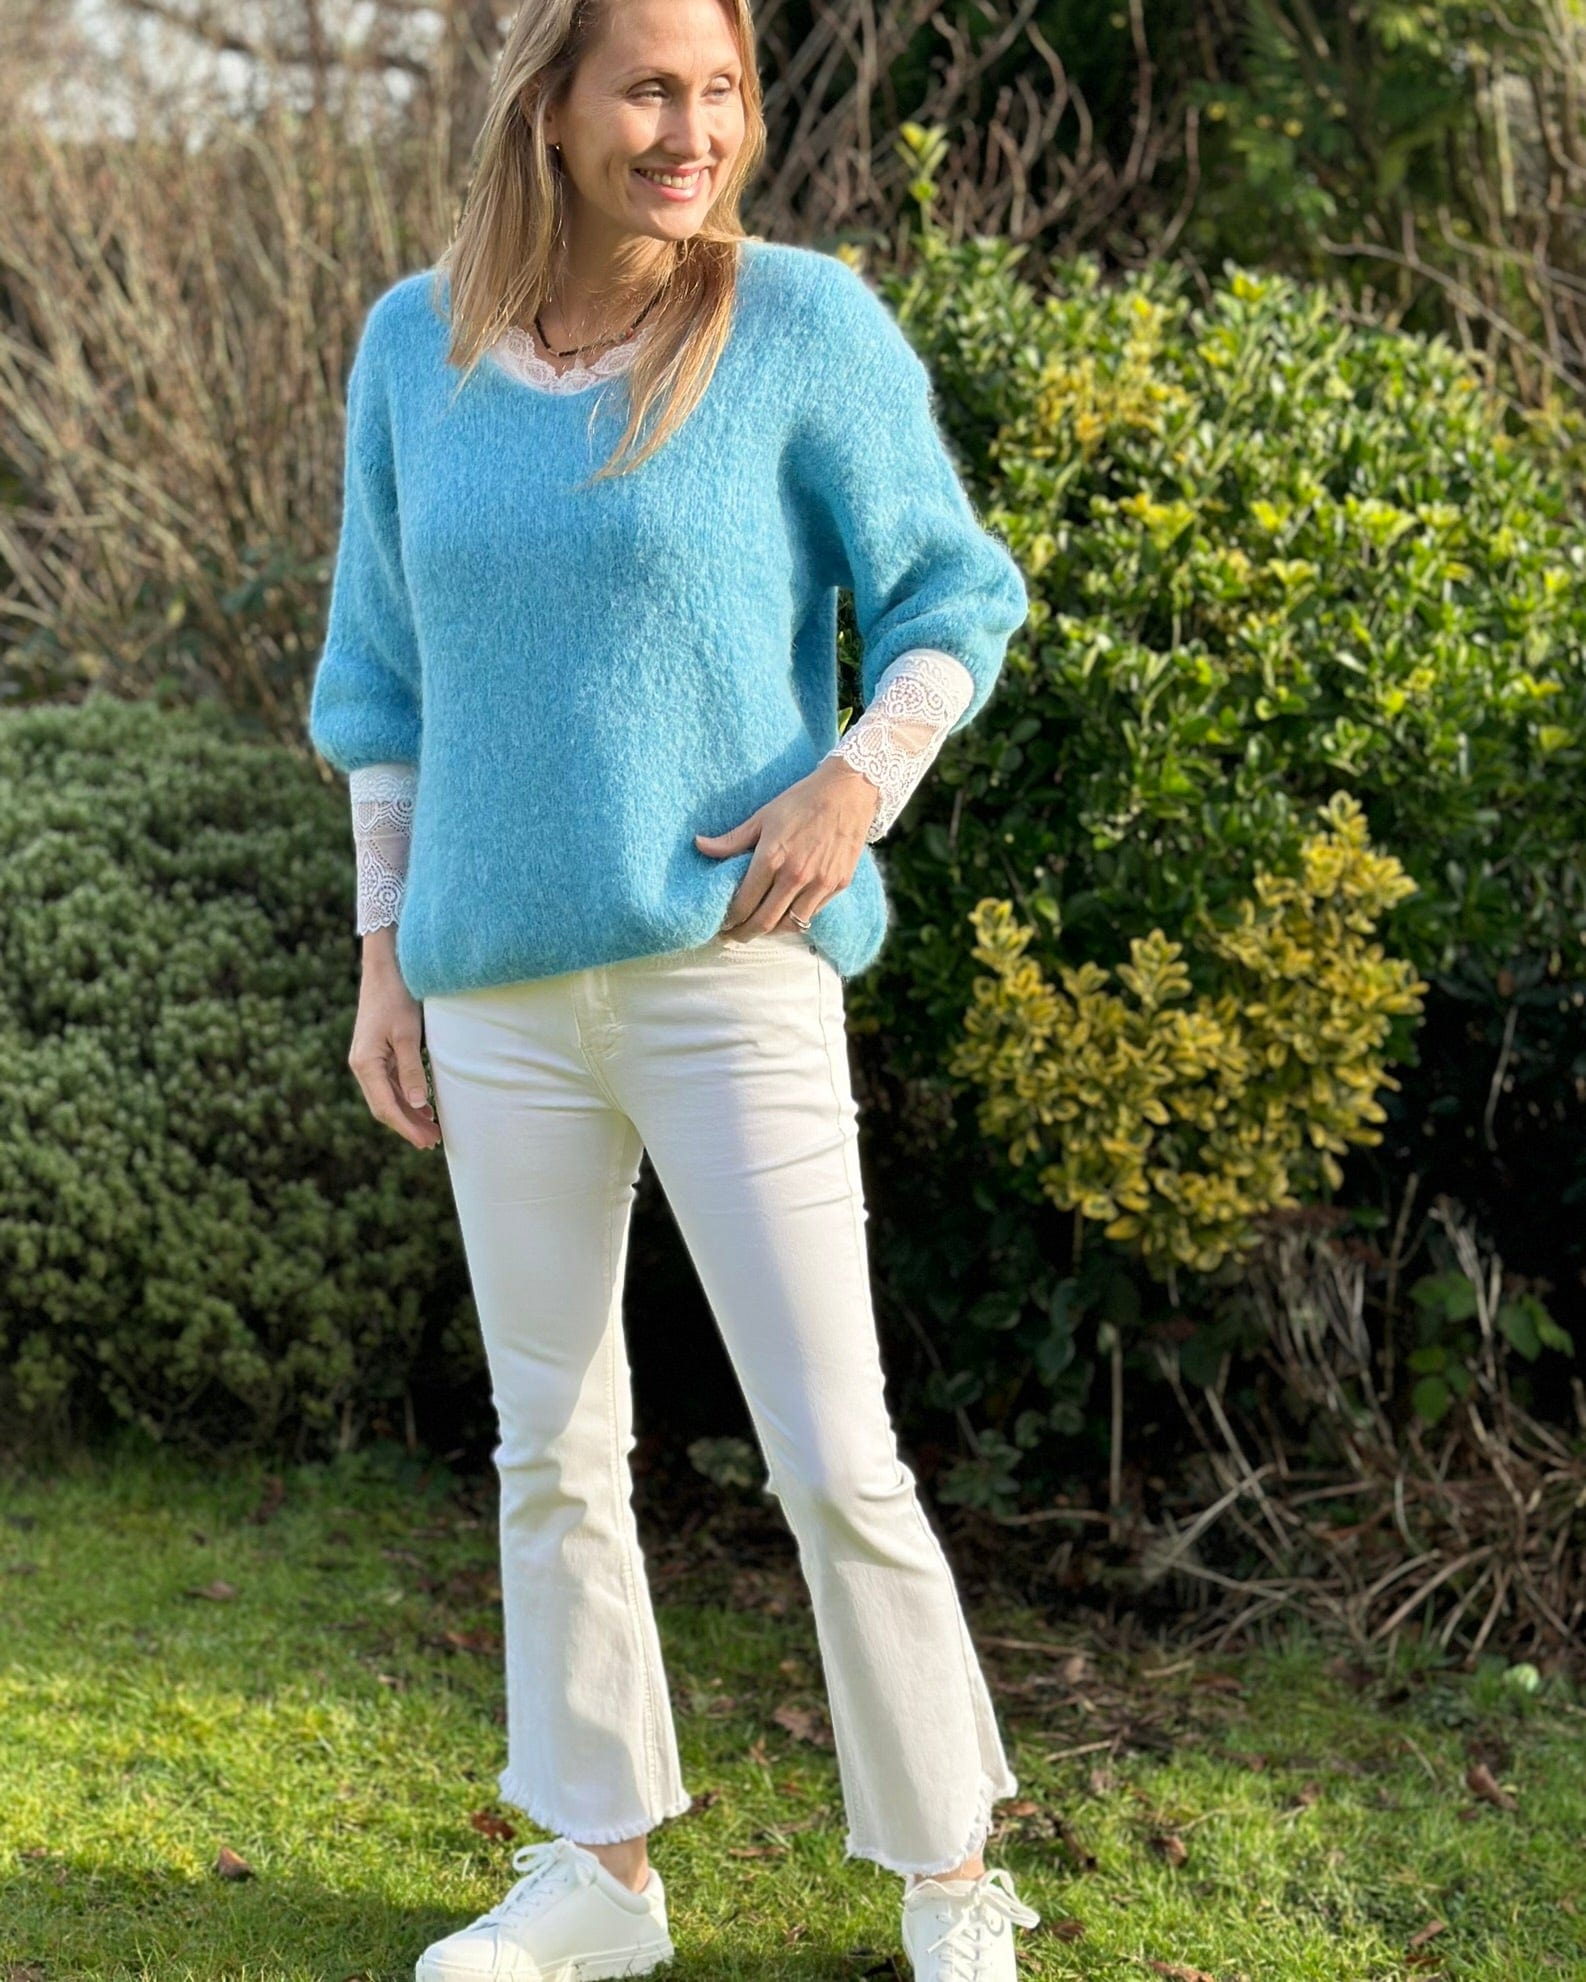 Super Stretchy Creamy-White Boot Cut Jeans